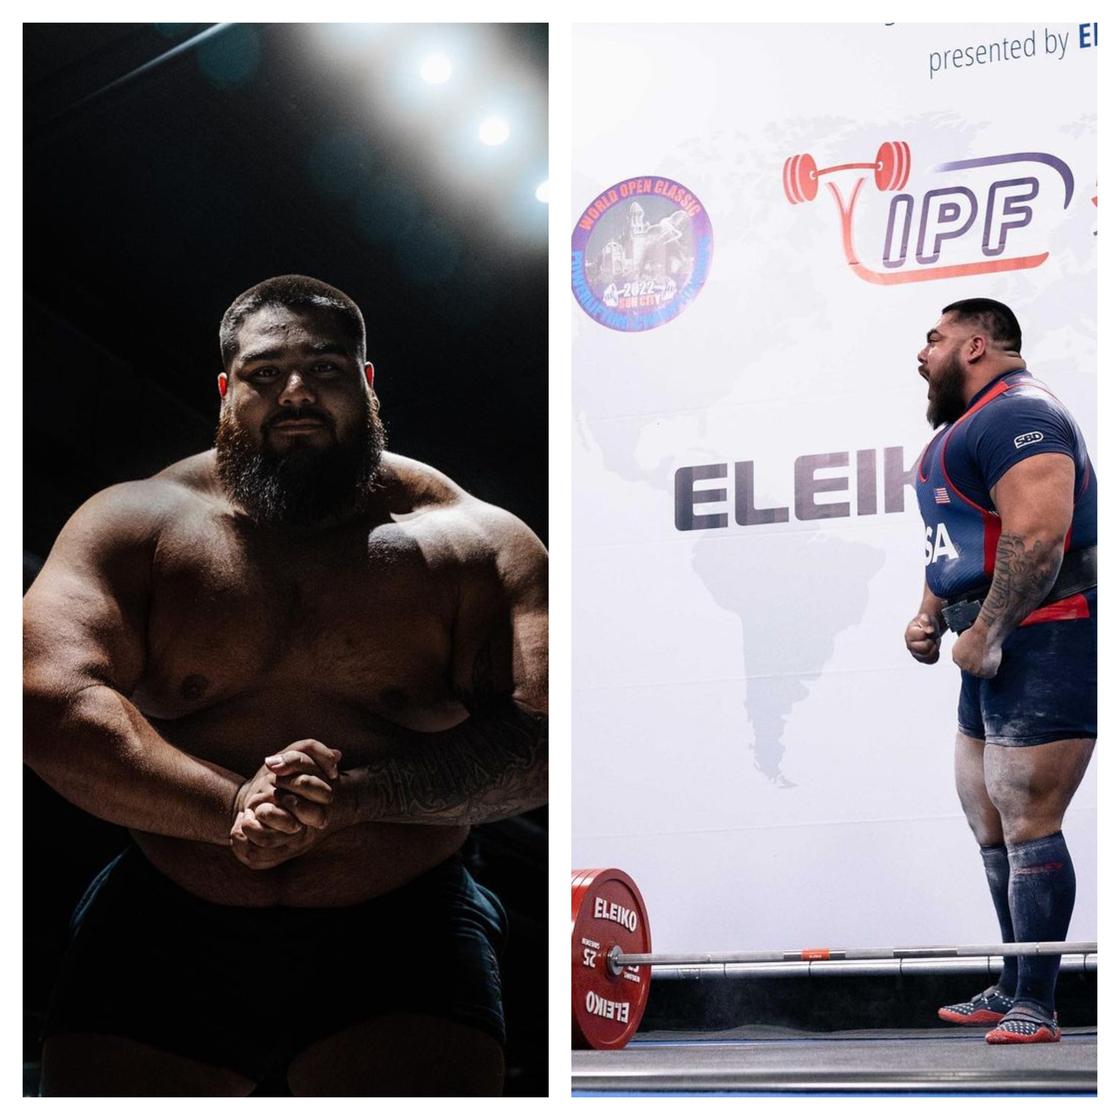 Jesus Olivares is known for his massive strength and Herculian frame. He is considered the best powerlifter in North America(Photo by Jesus Olivares via Instagram)